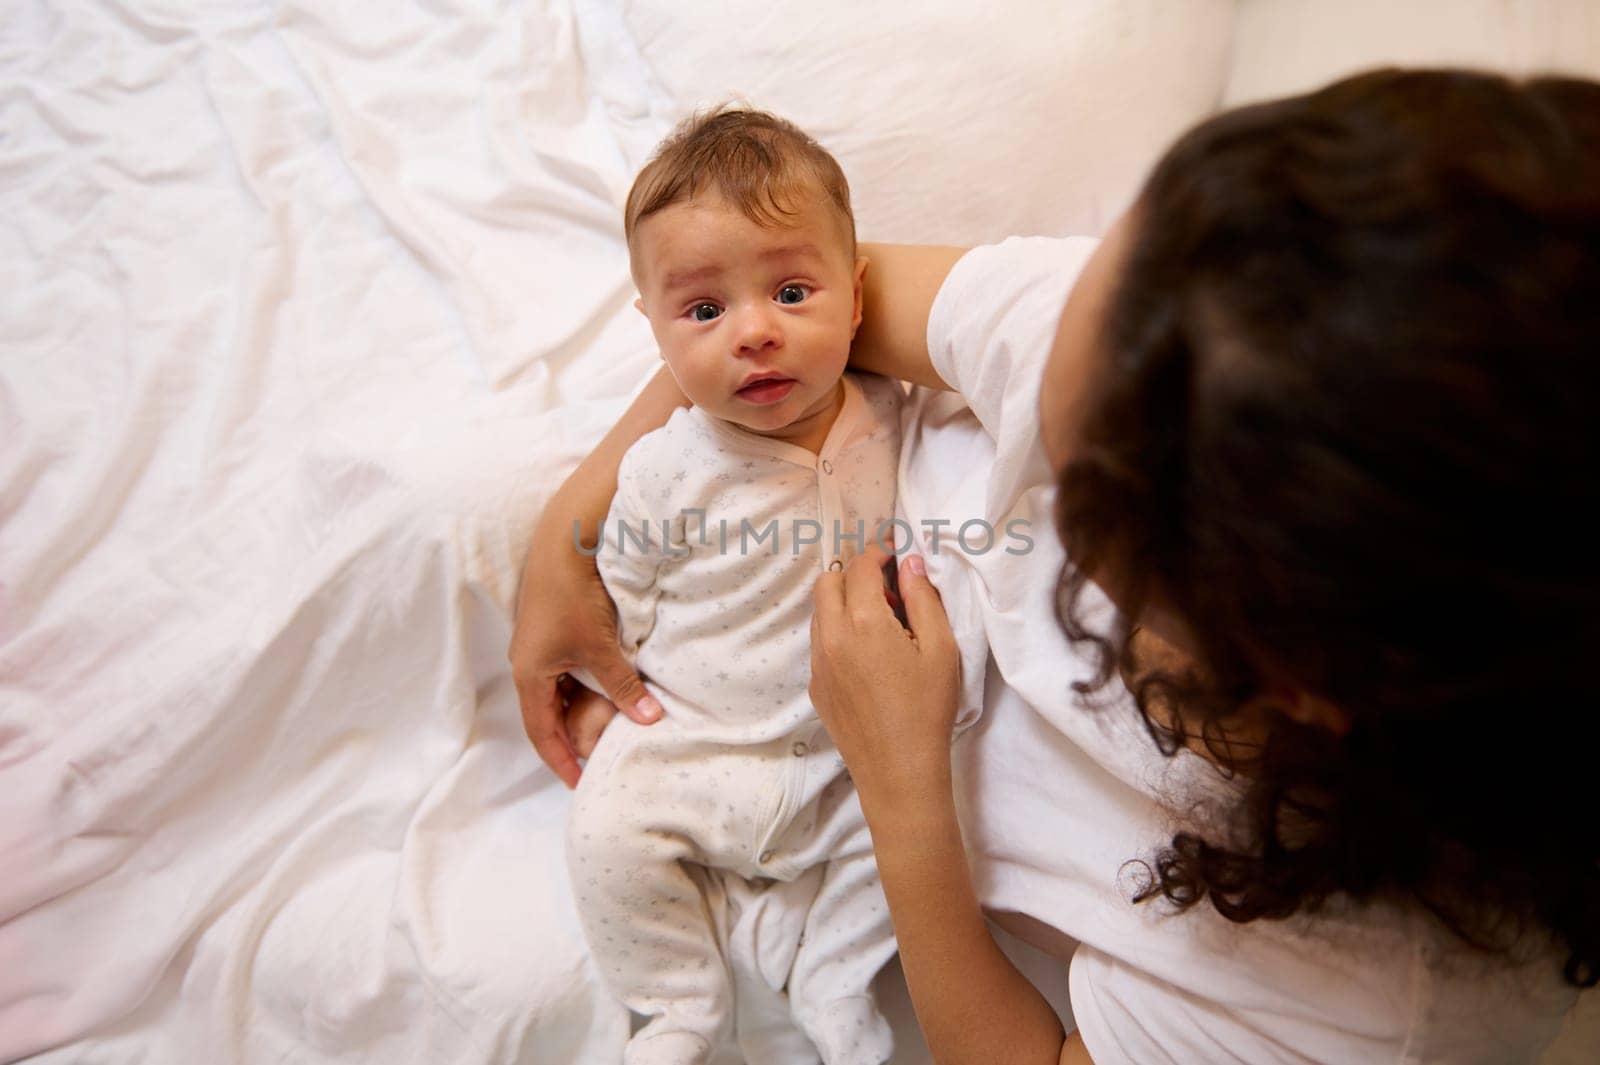 Portrait of authentic little baby boy in the hands of his mother, sitting together on the bed in cozy bedroom interior. Maternity leave lifestyle, infancy, babyhood. Motherhood. Single parenting